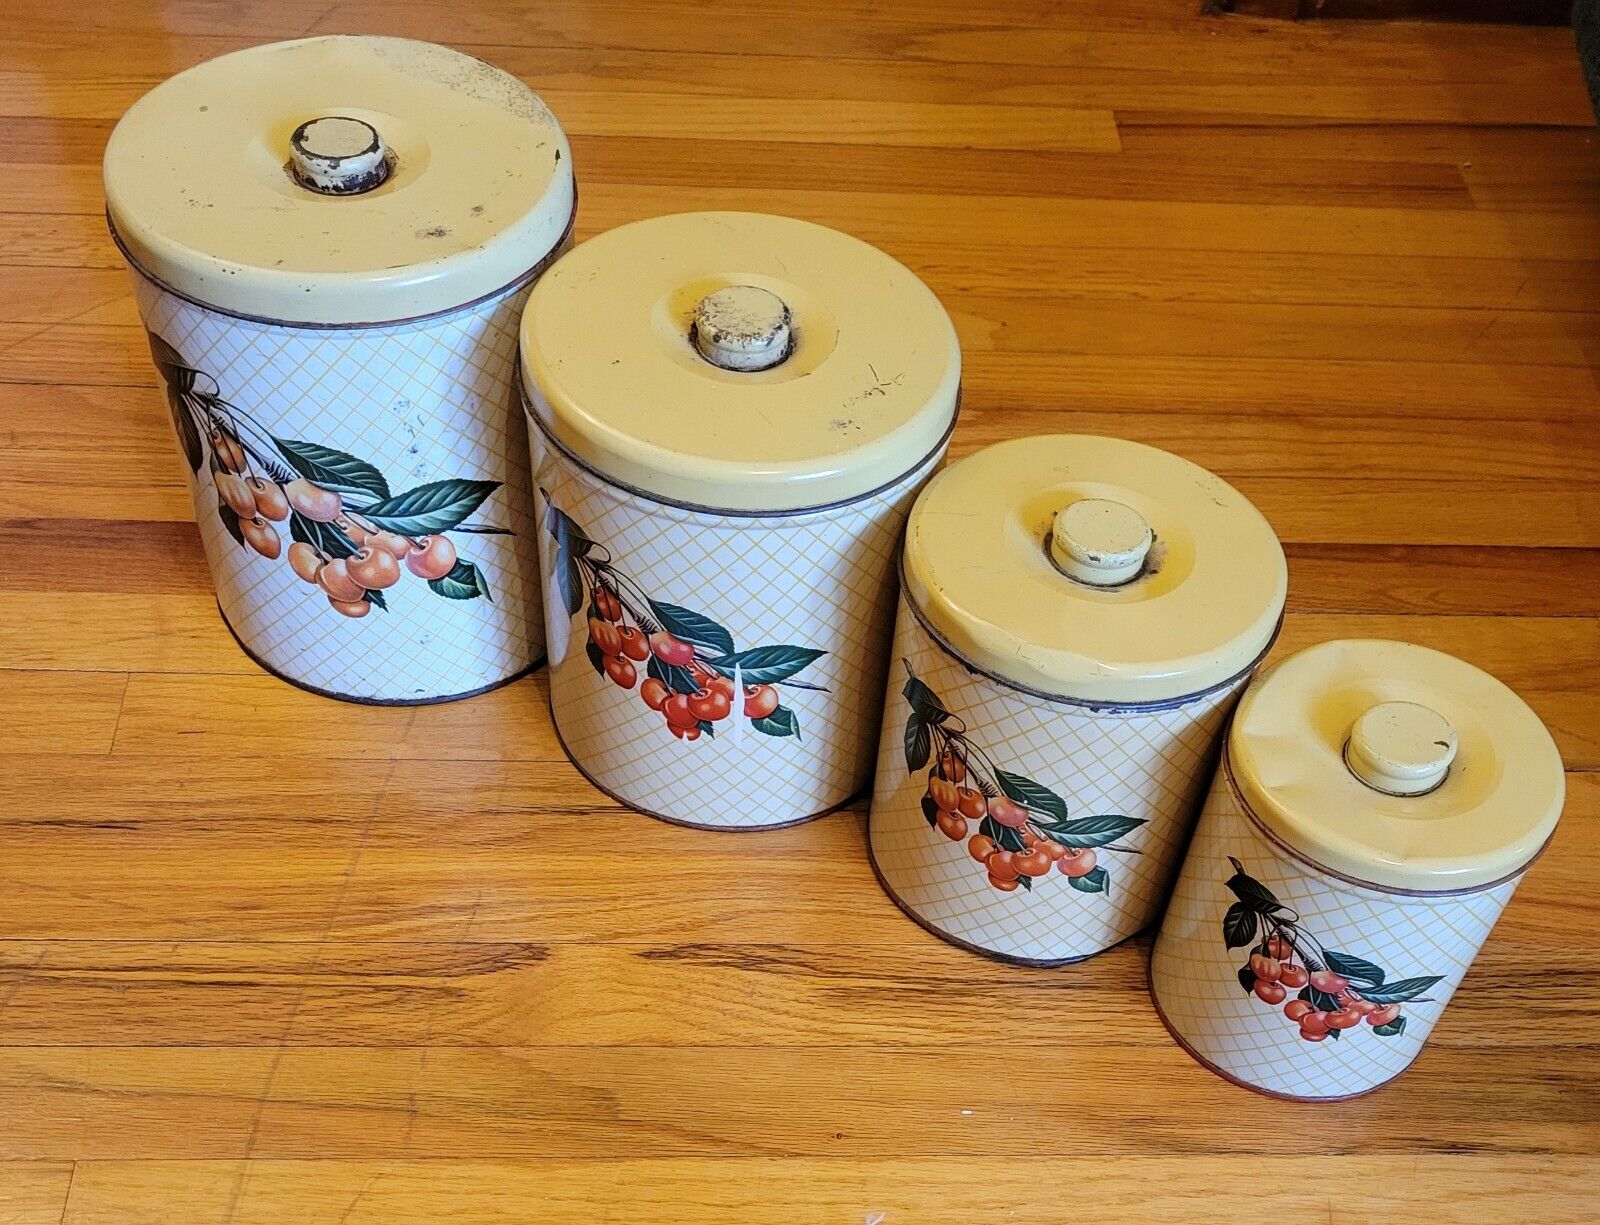 4 Vintage 1950s Decoware Distressed Tin Nesting Canisters with Cherry Design 🍒